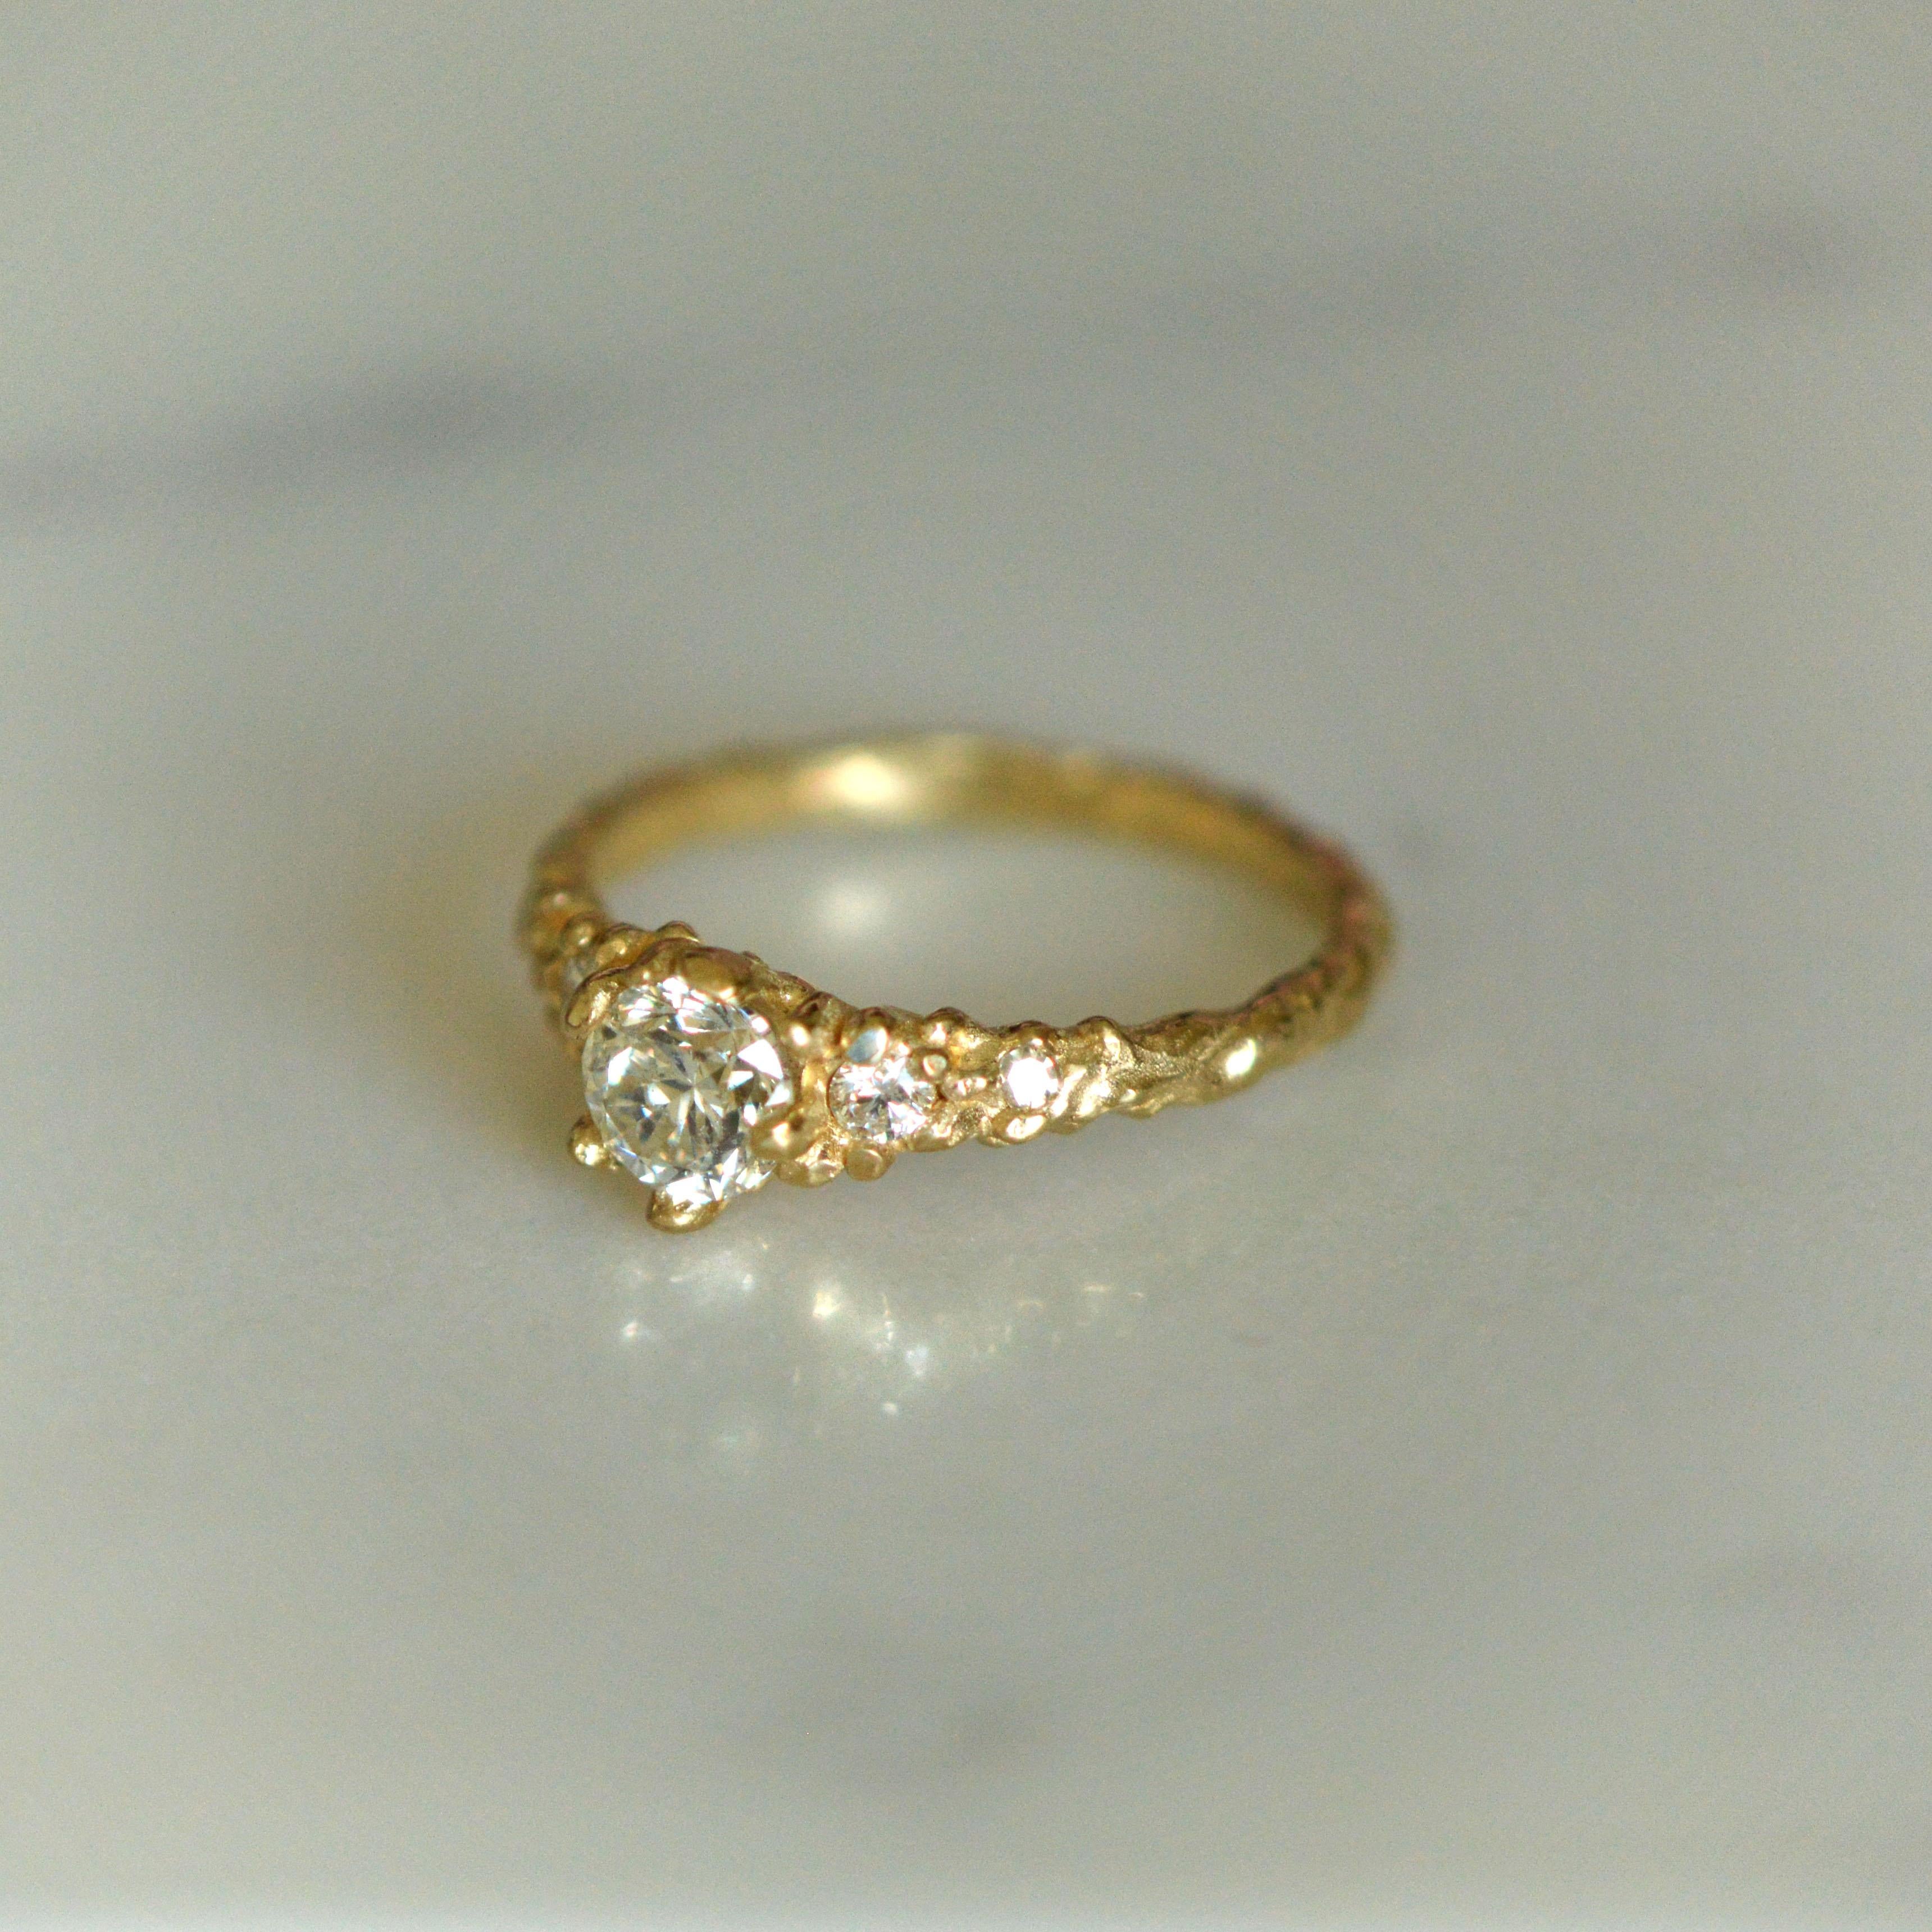 Solid 18 Carat Gold Earth Diamond Ring by Lucy Stopes-Roe For Sale 4